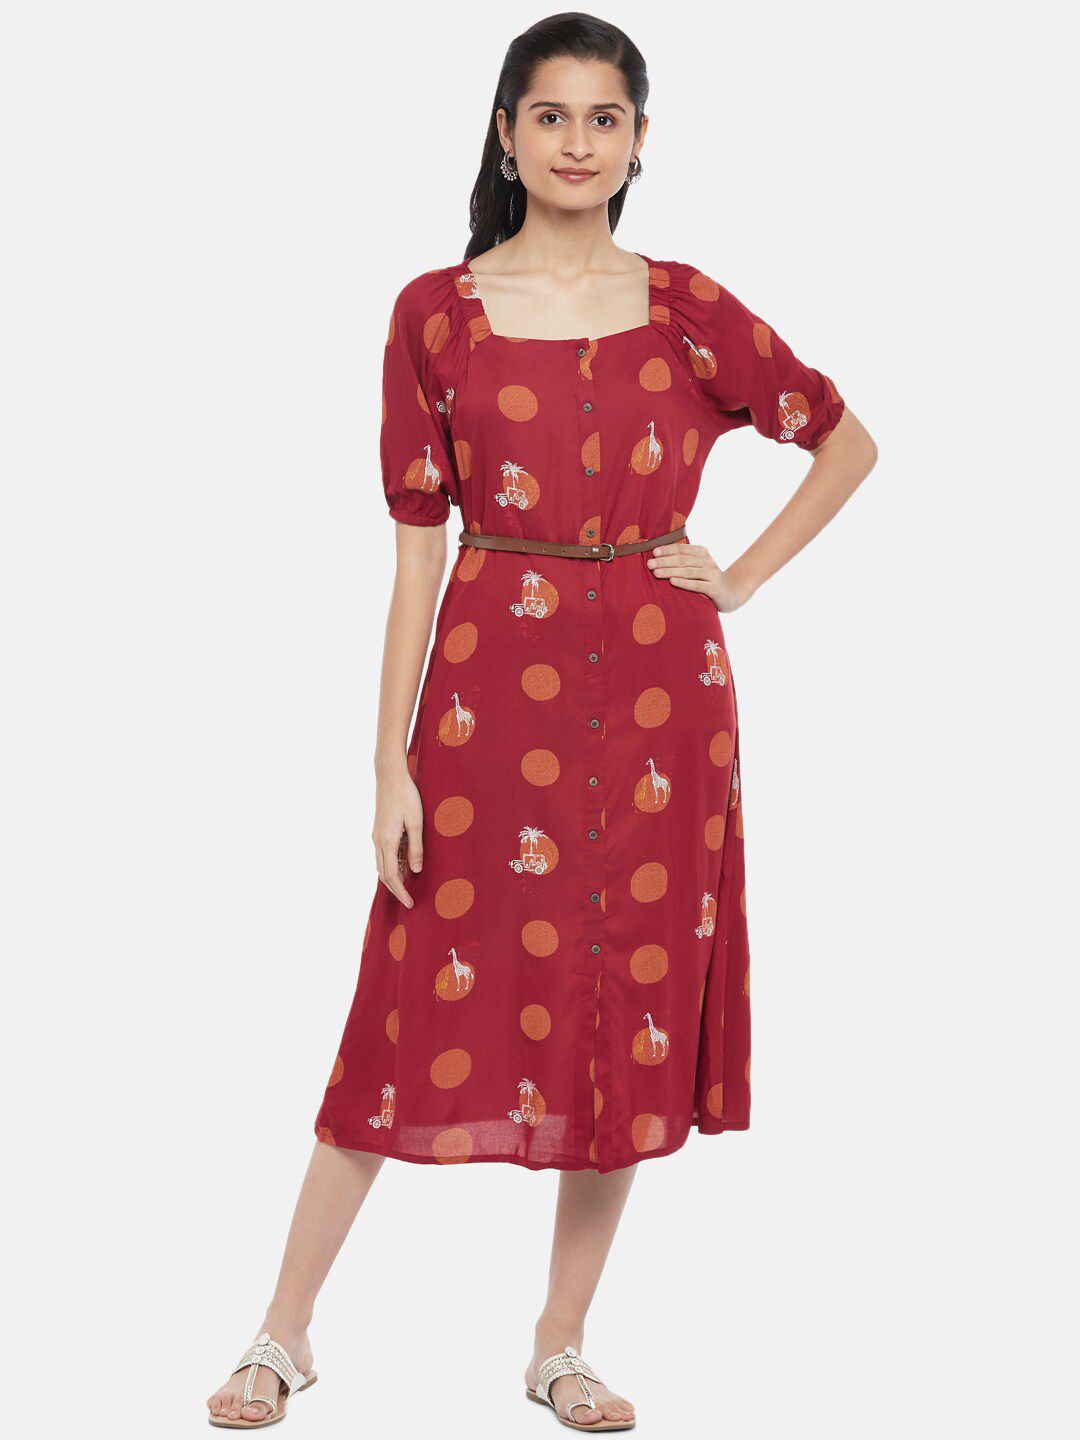 AKKRITI BY PANTALOONS Red Ethnic Motifs A-Line Midi Dress Price in India